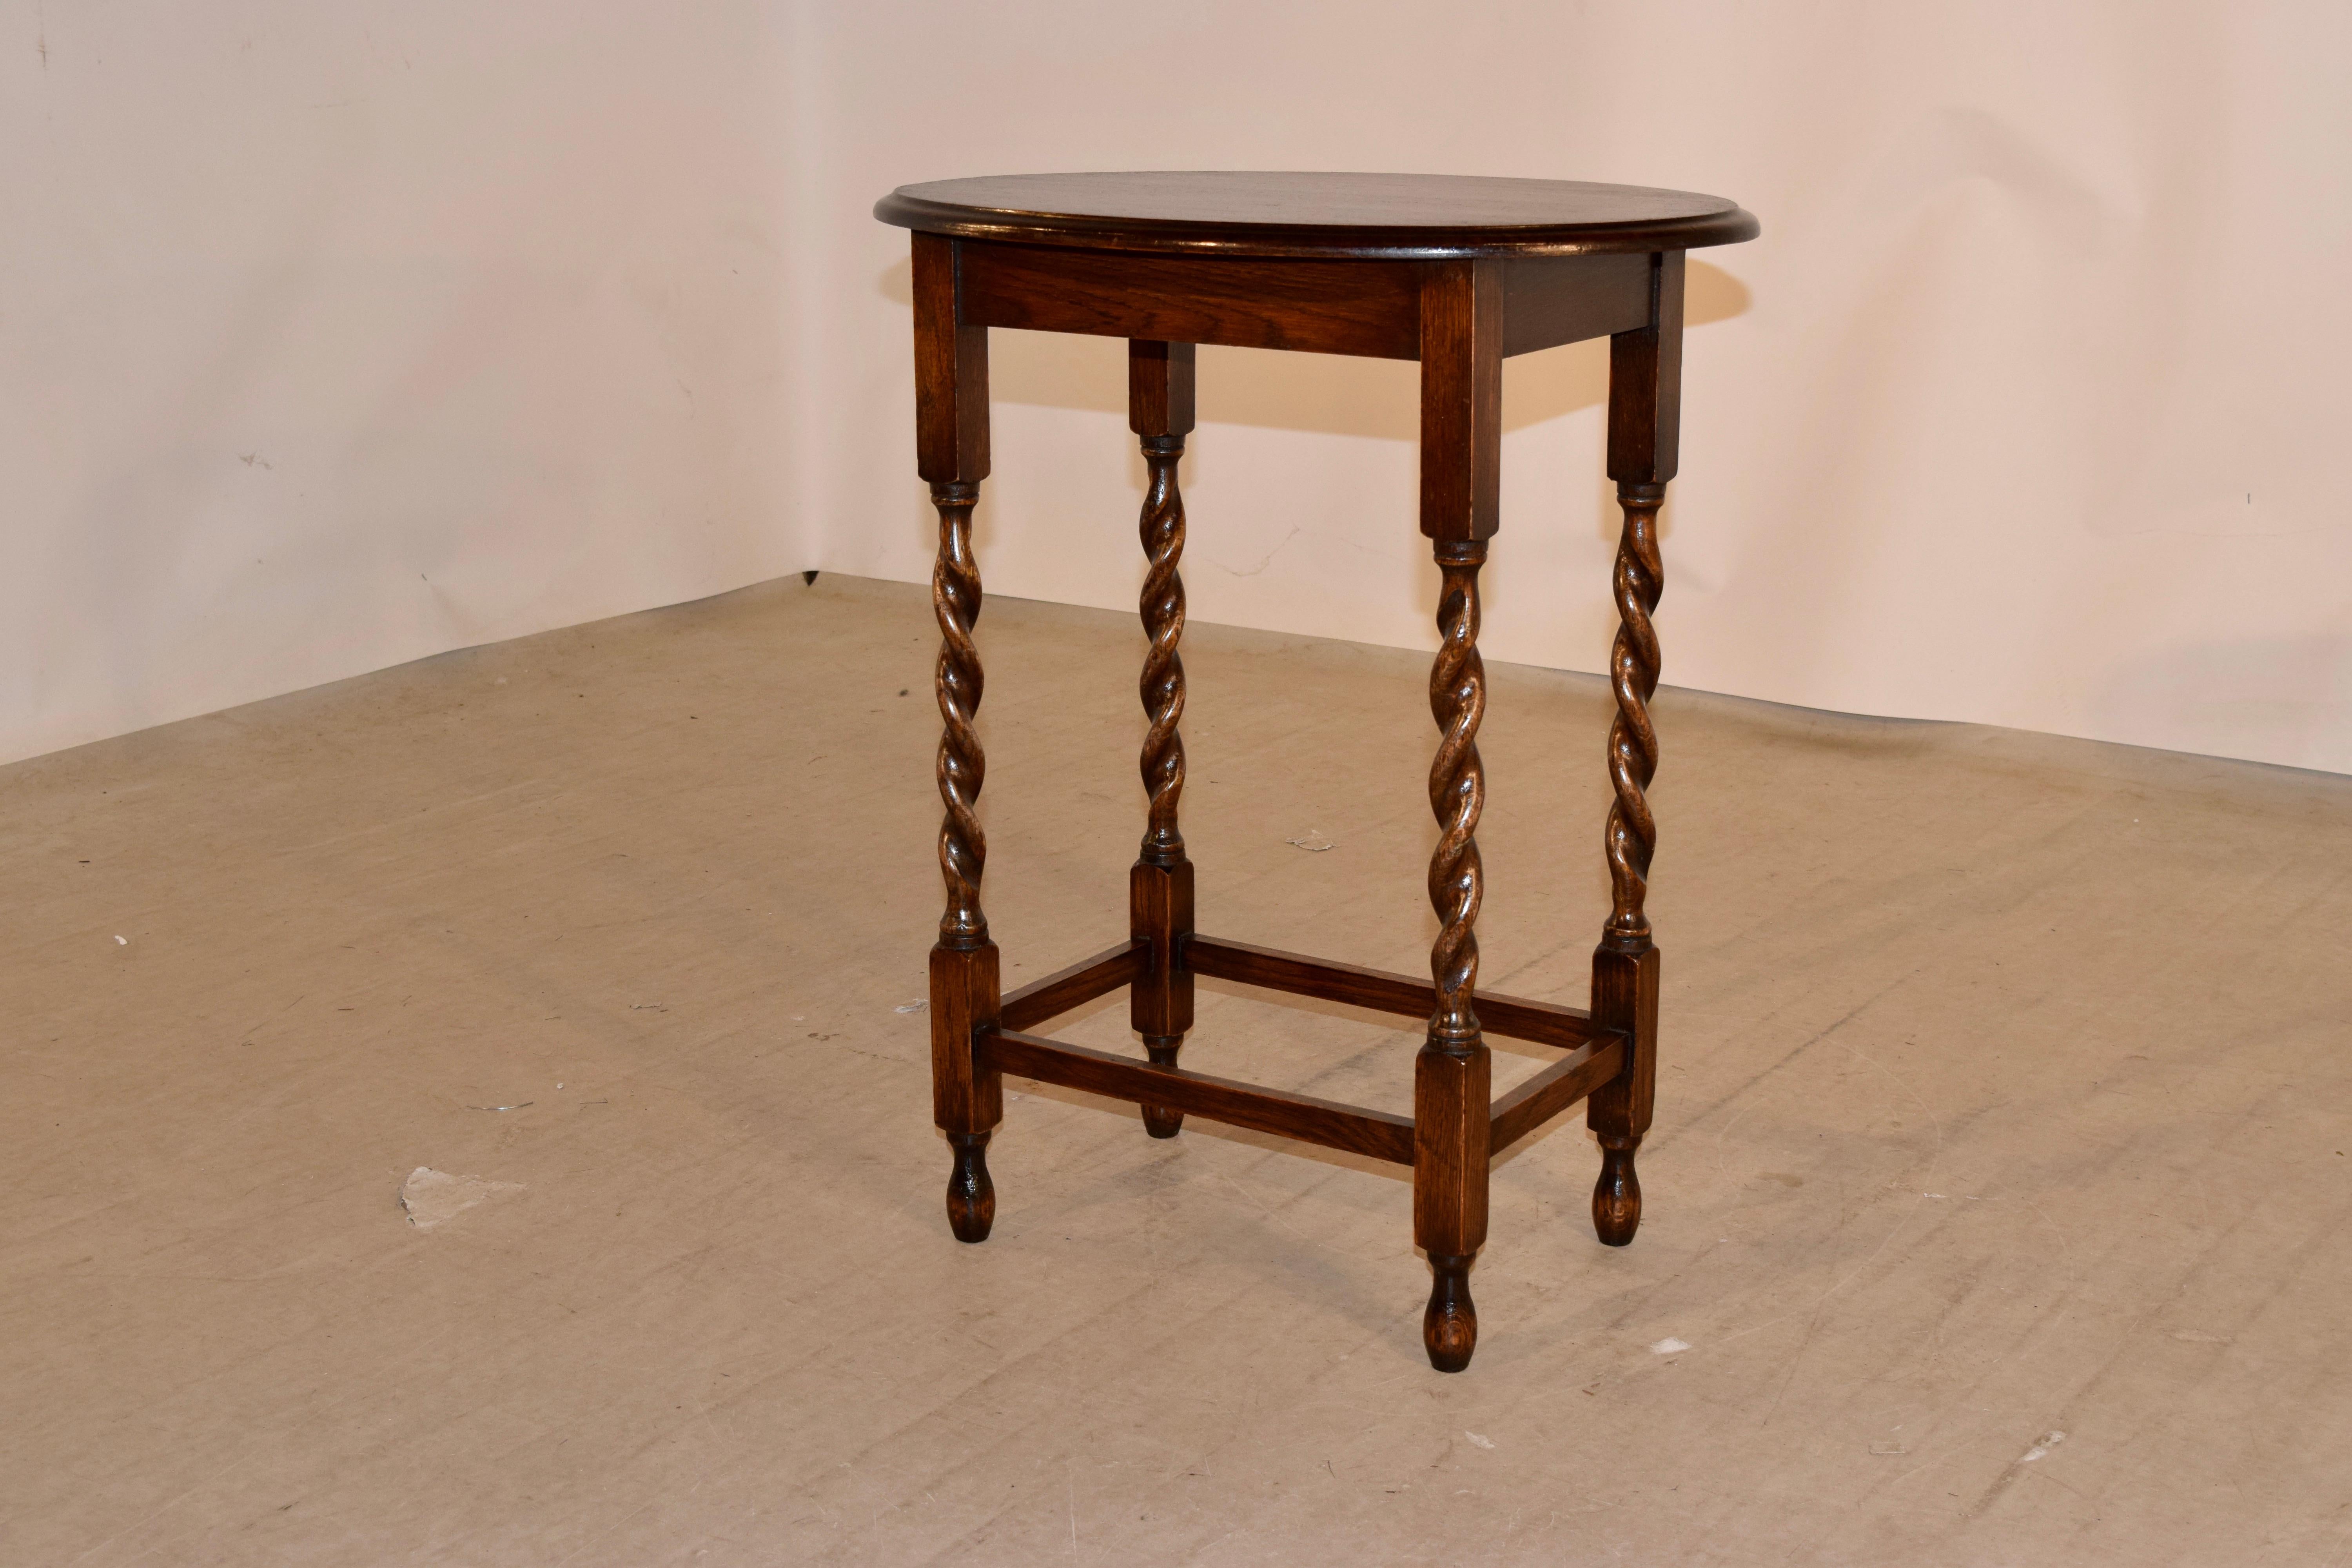 Turned English Oval Occasional Table, circa 1900